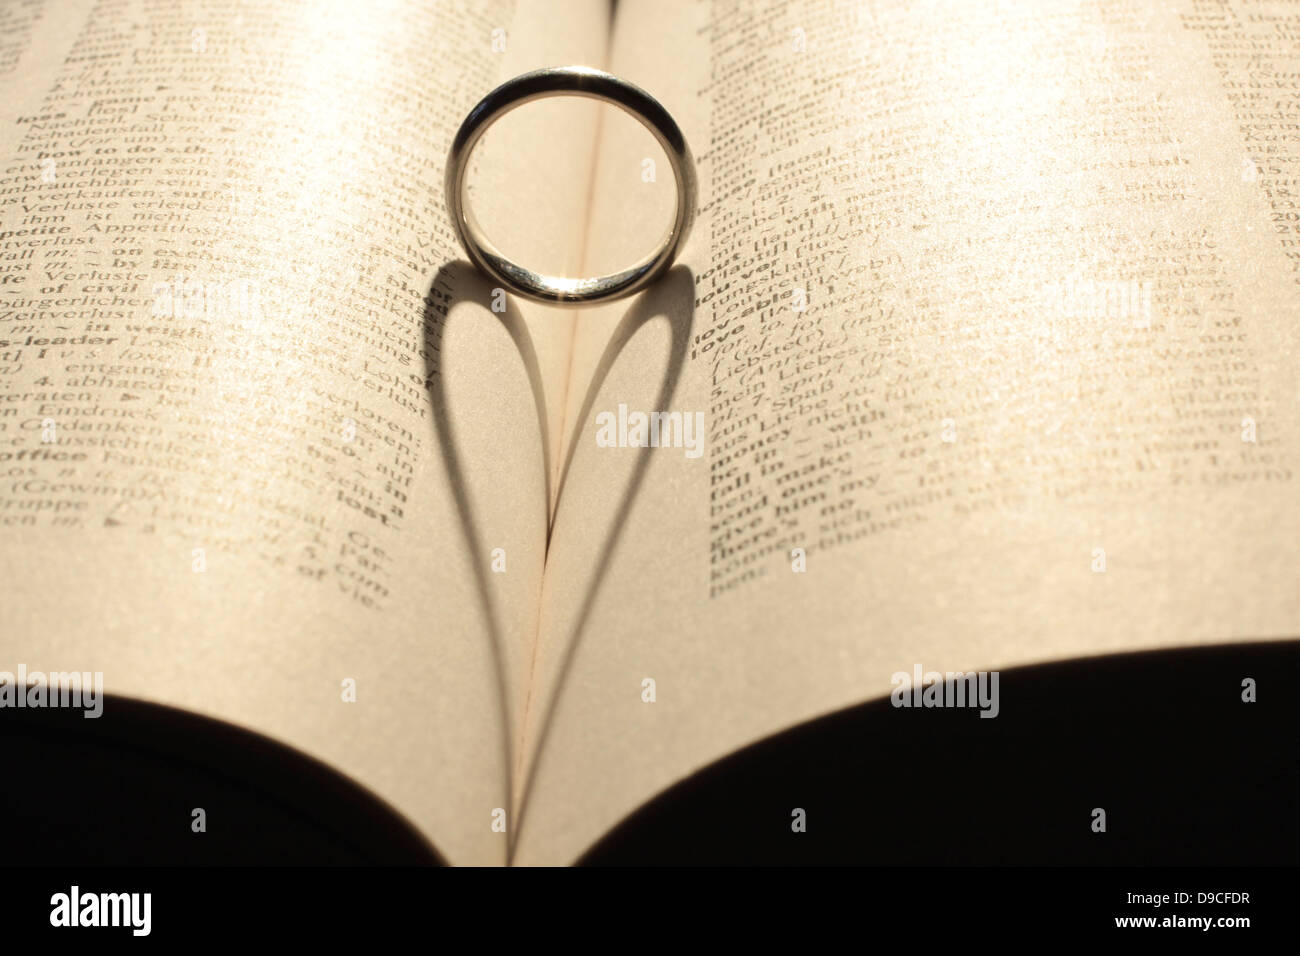 Heart shadow from wedding ring on book Stock Photo